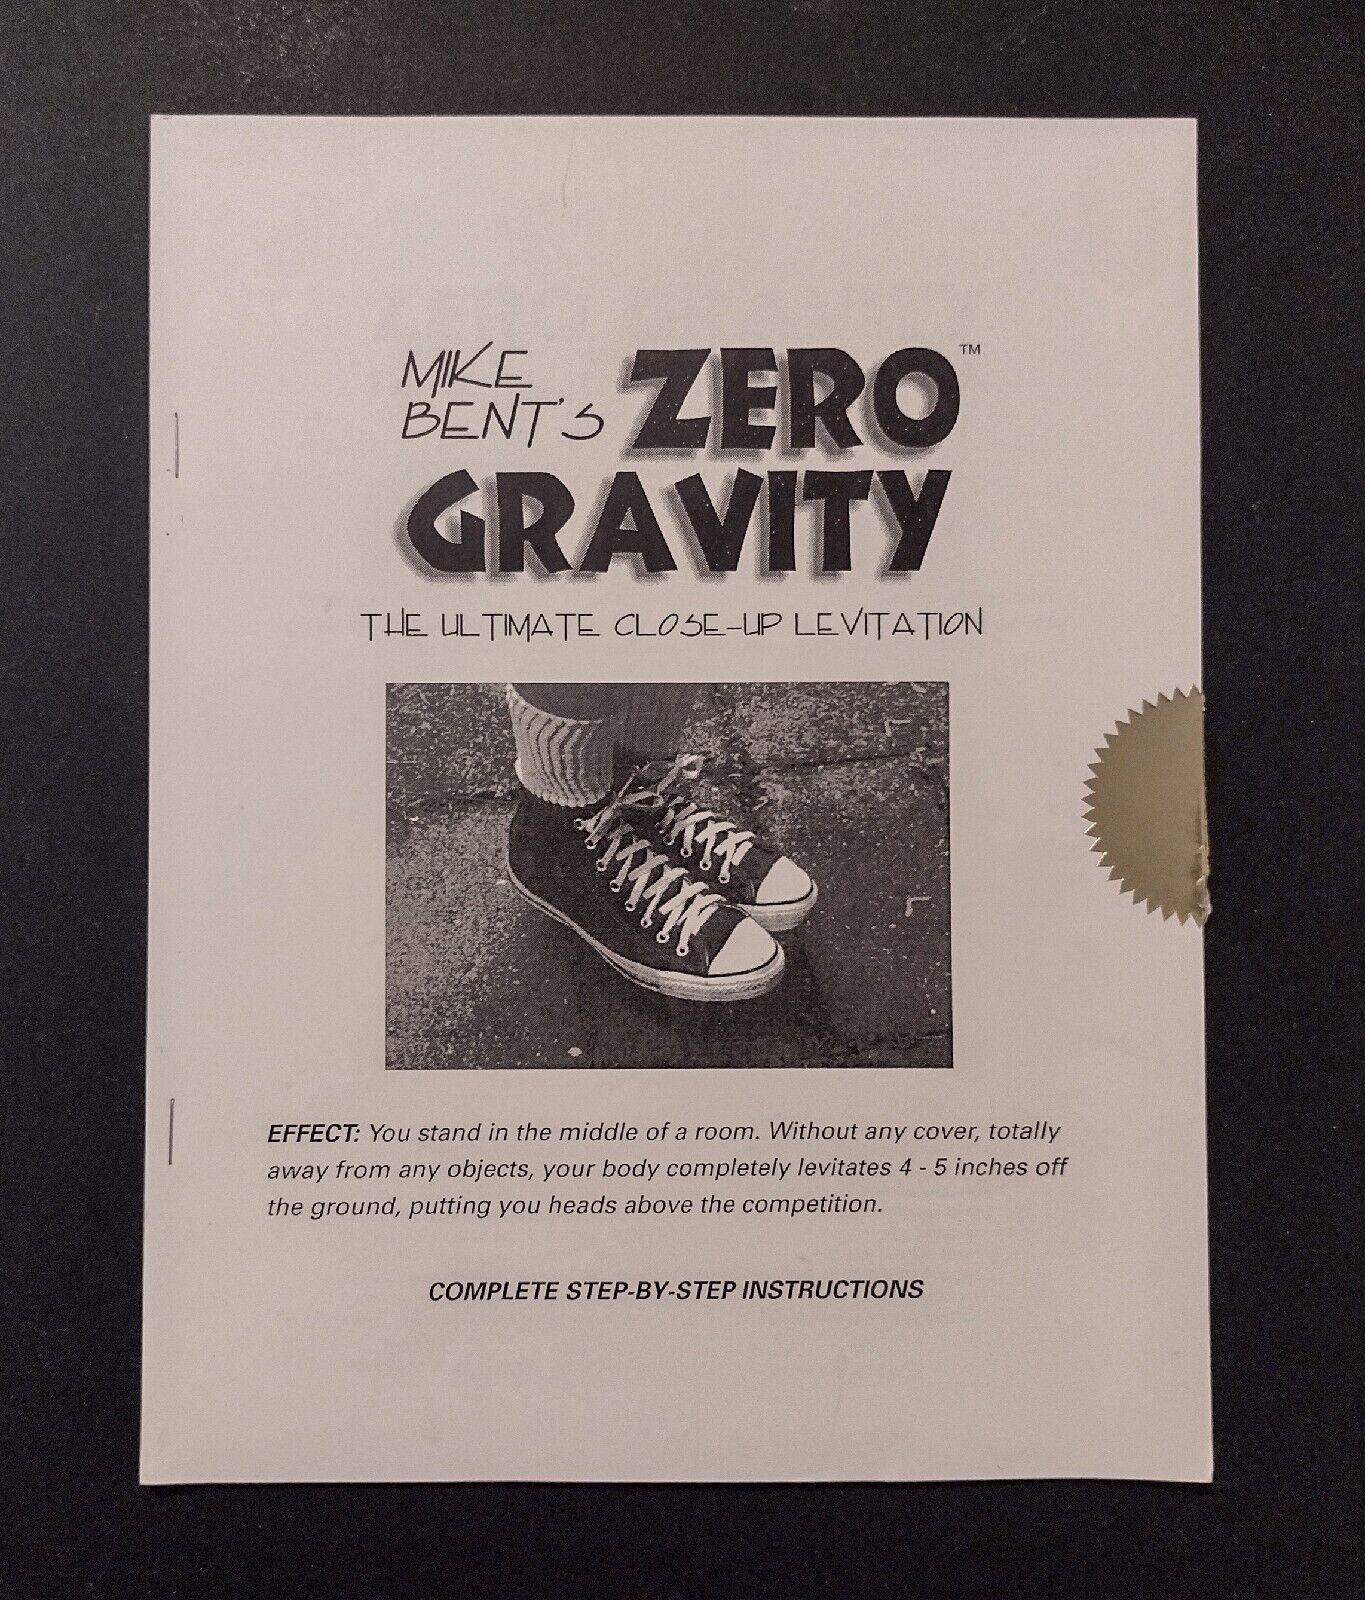 Mike Bent's ZERO GRAVITY The Ultimate Close-up Levitation Official Signed & Numb